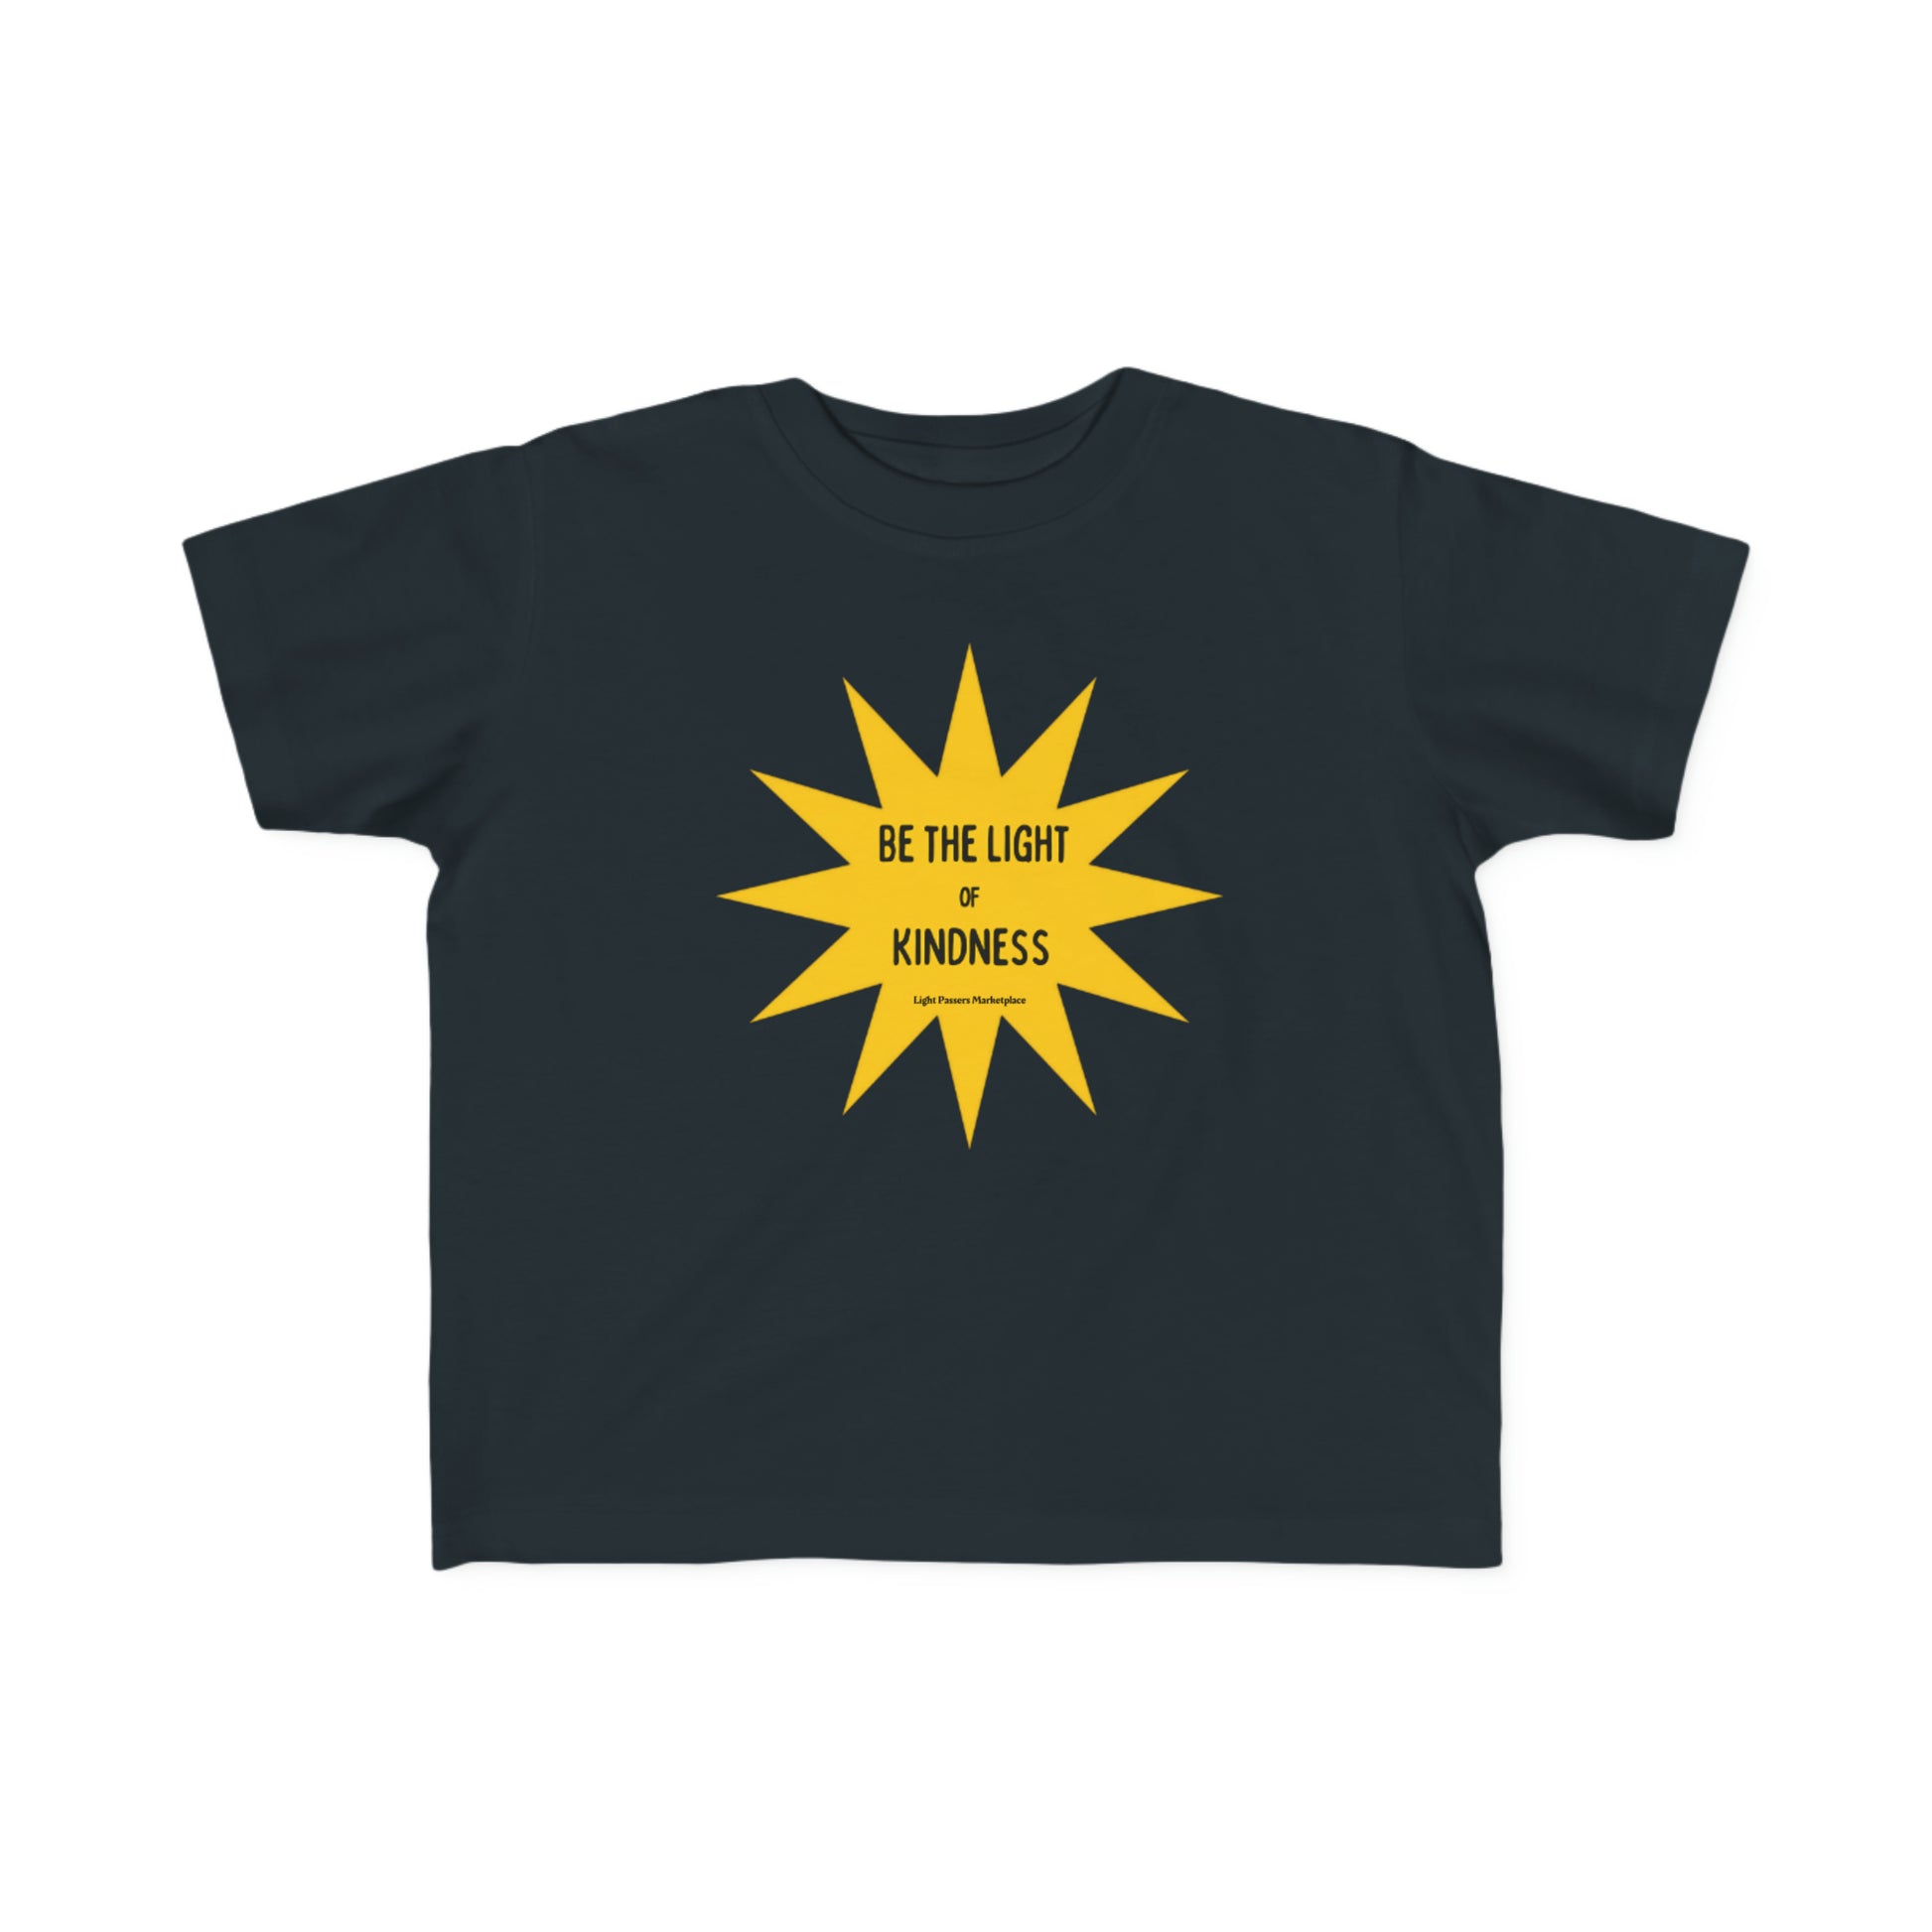 A toddler's black tee with a yellow star and sun design, ideal for sensitive skin. Made of 100% combed, ring-spun cotton, featuring a durable print and a tear-away label.